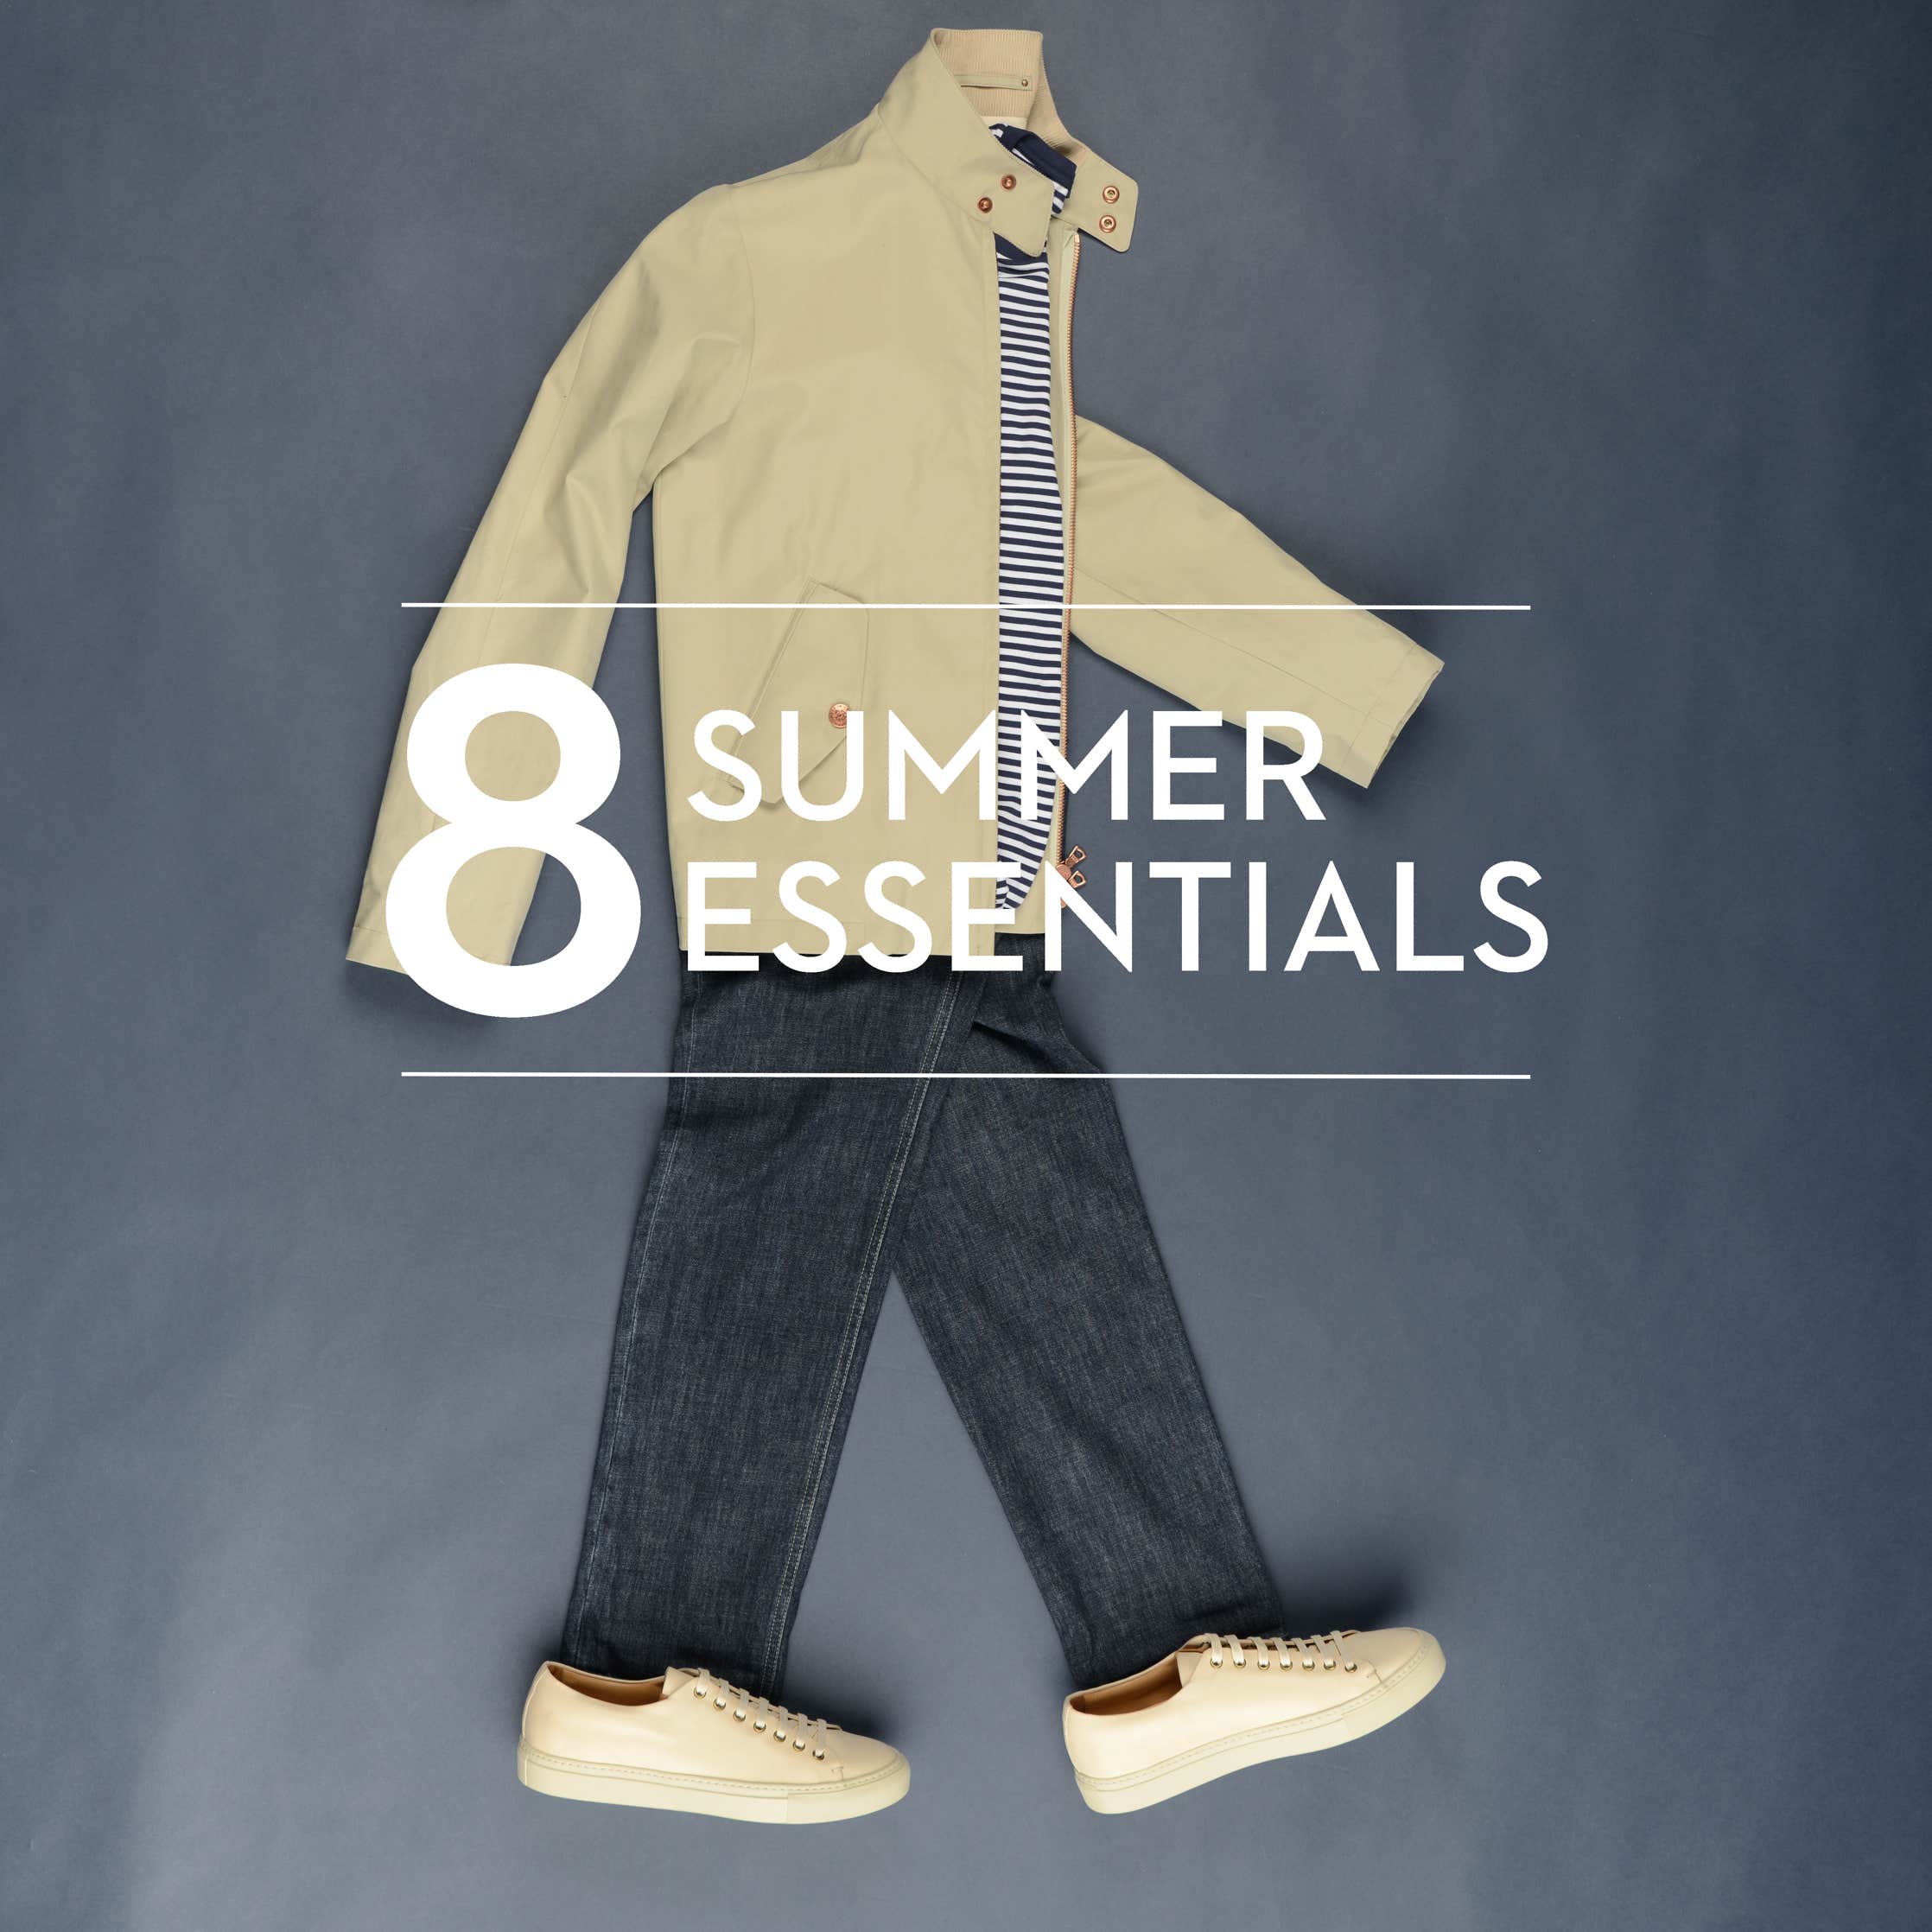 THE HELM’S APPROACH: 8 SUMMER ESSENTIALS TO PAIR FOR AN EFFORTLESSLY COOL LOOK